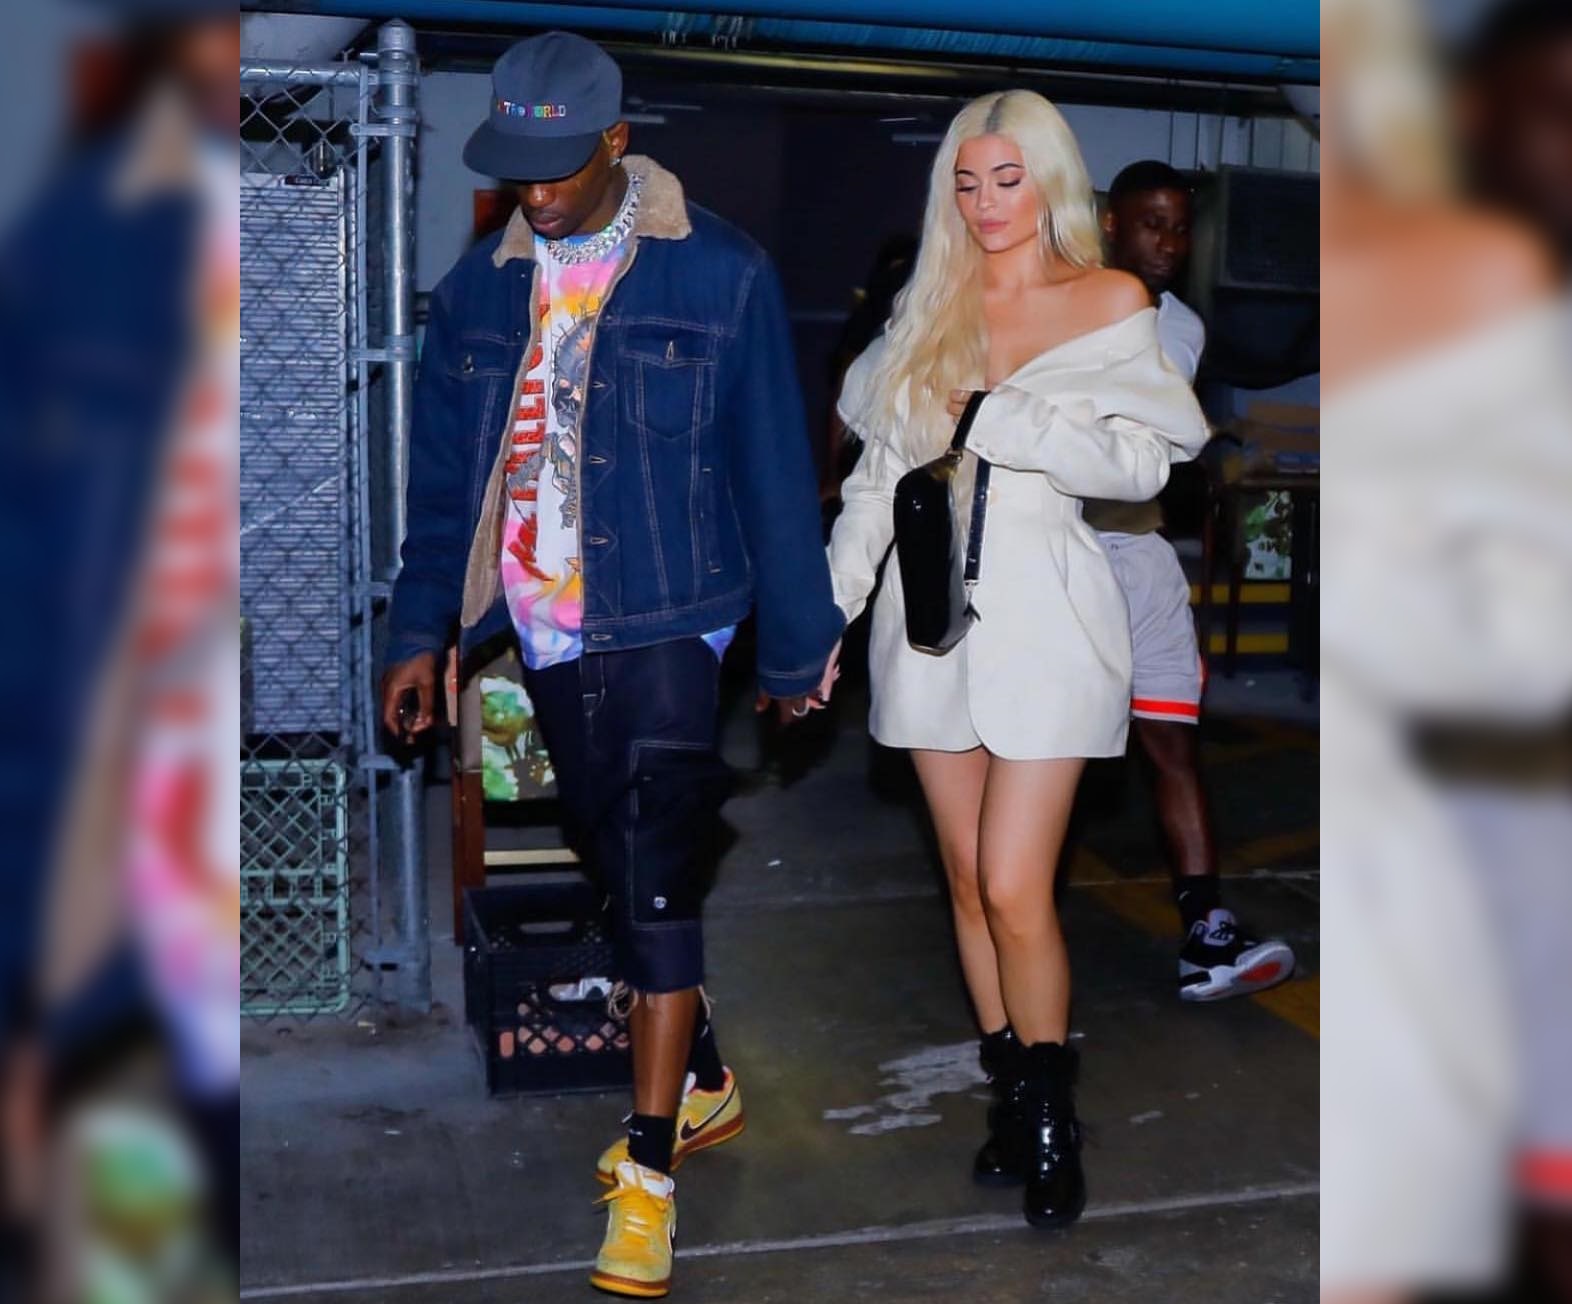 SPOTTED: Travis Scott and Kylie Jenner Go Bold in Miami